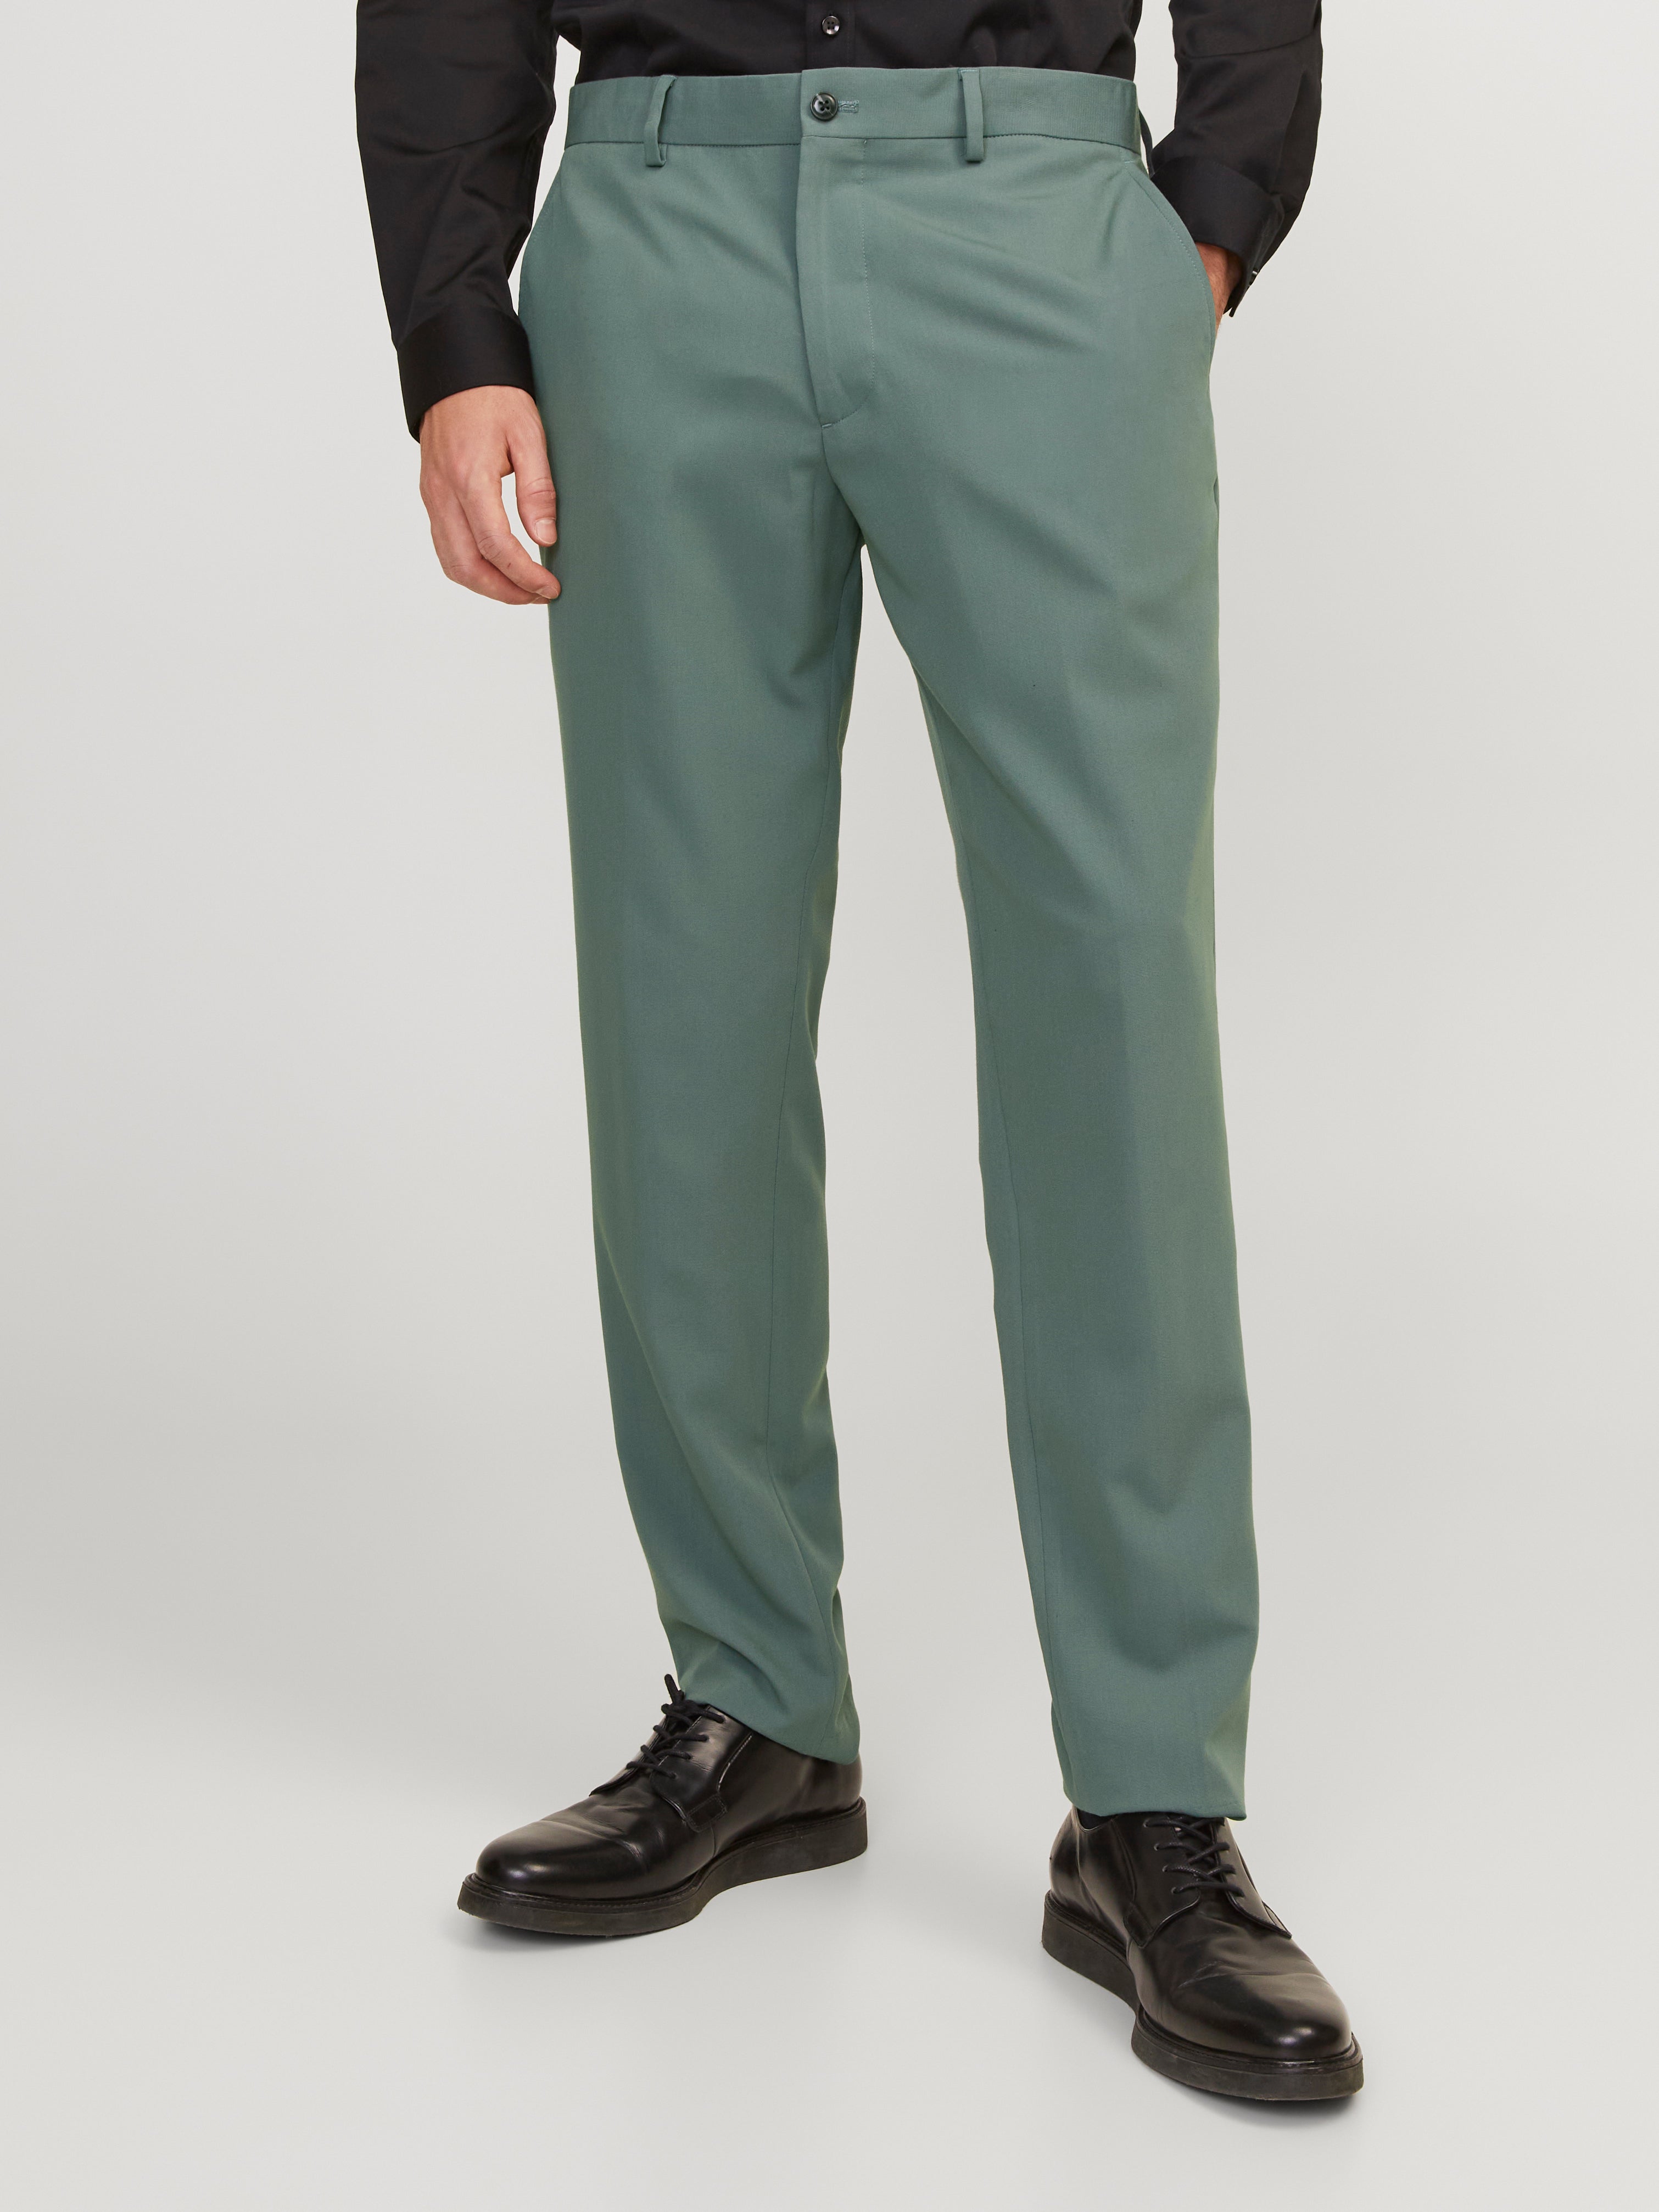 POLO RALPH LAUREN TAILORED SLIM FIT POLO PREPSTER PANT– Yooto